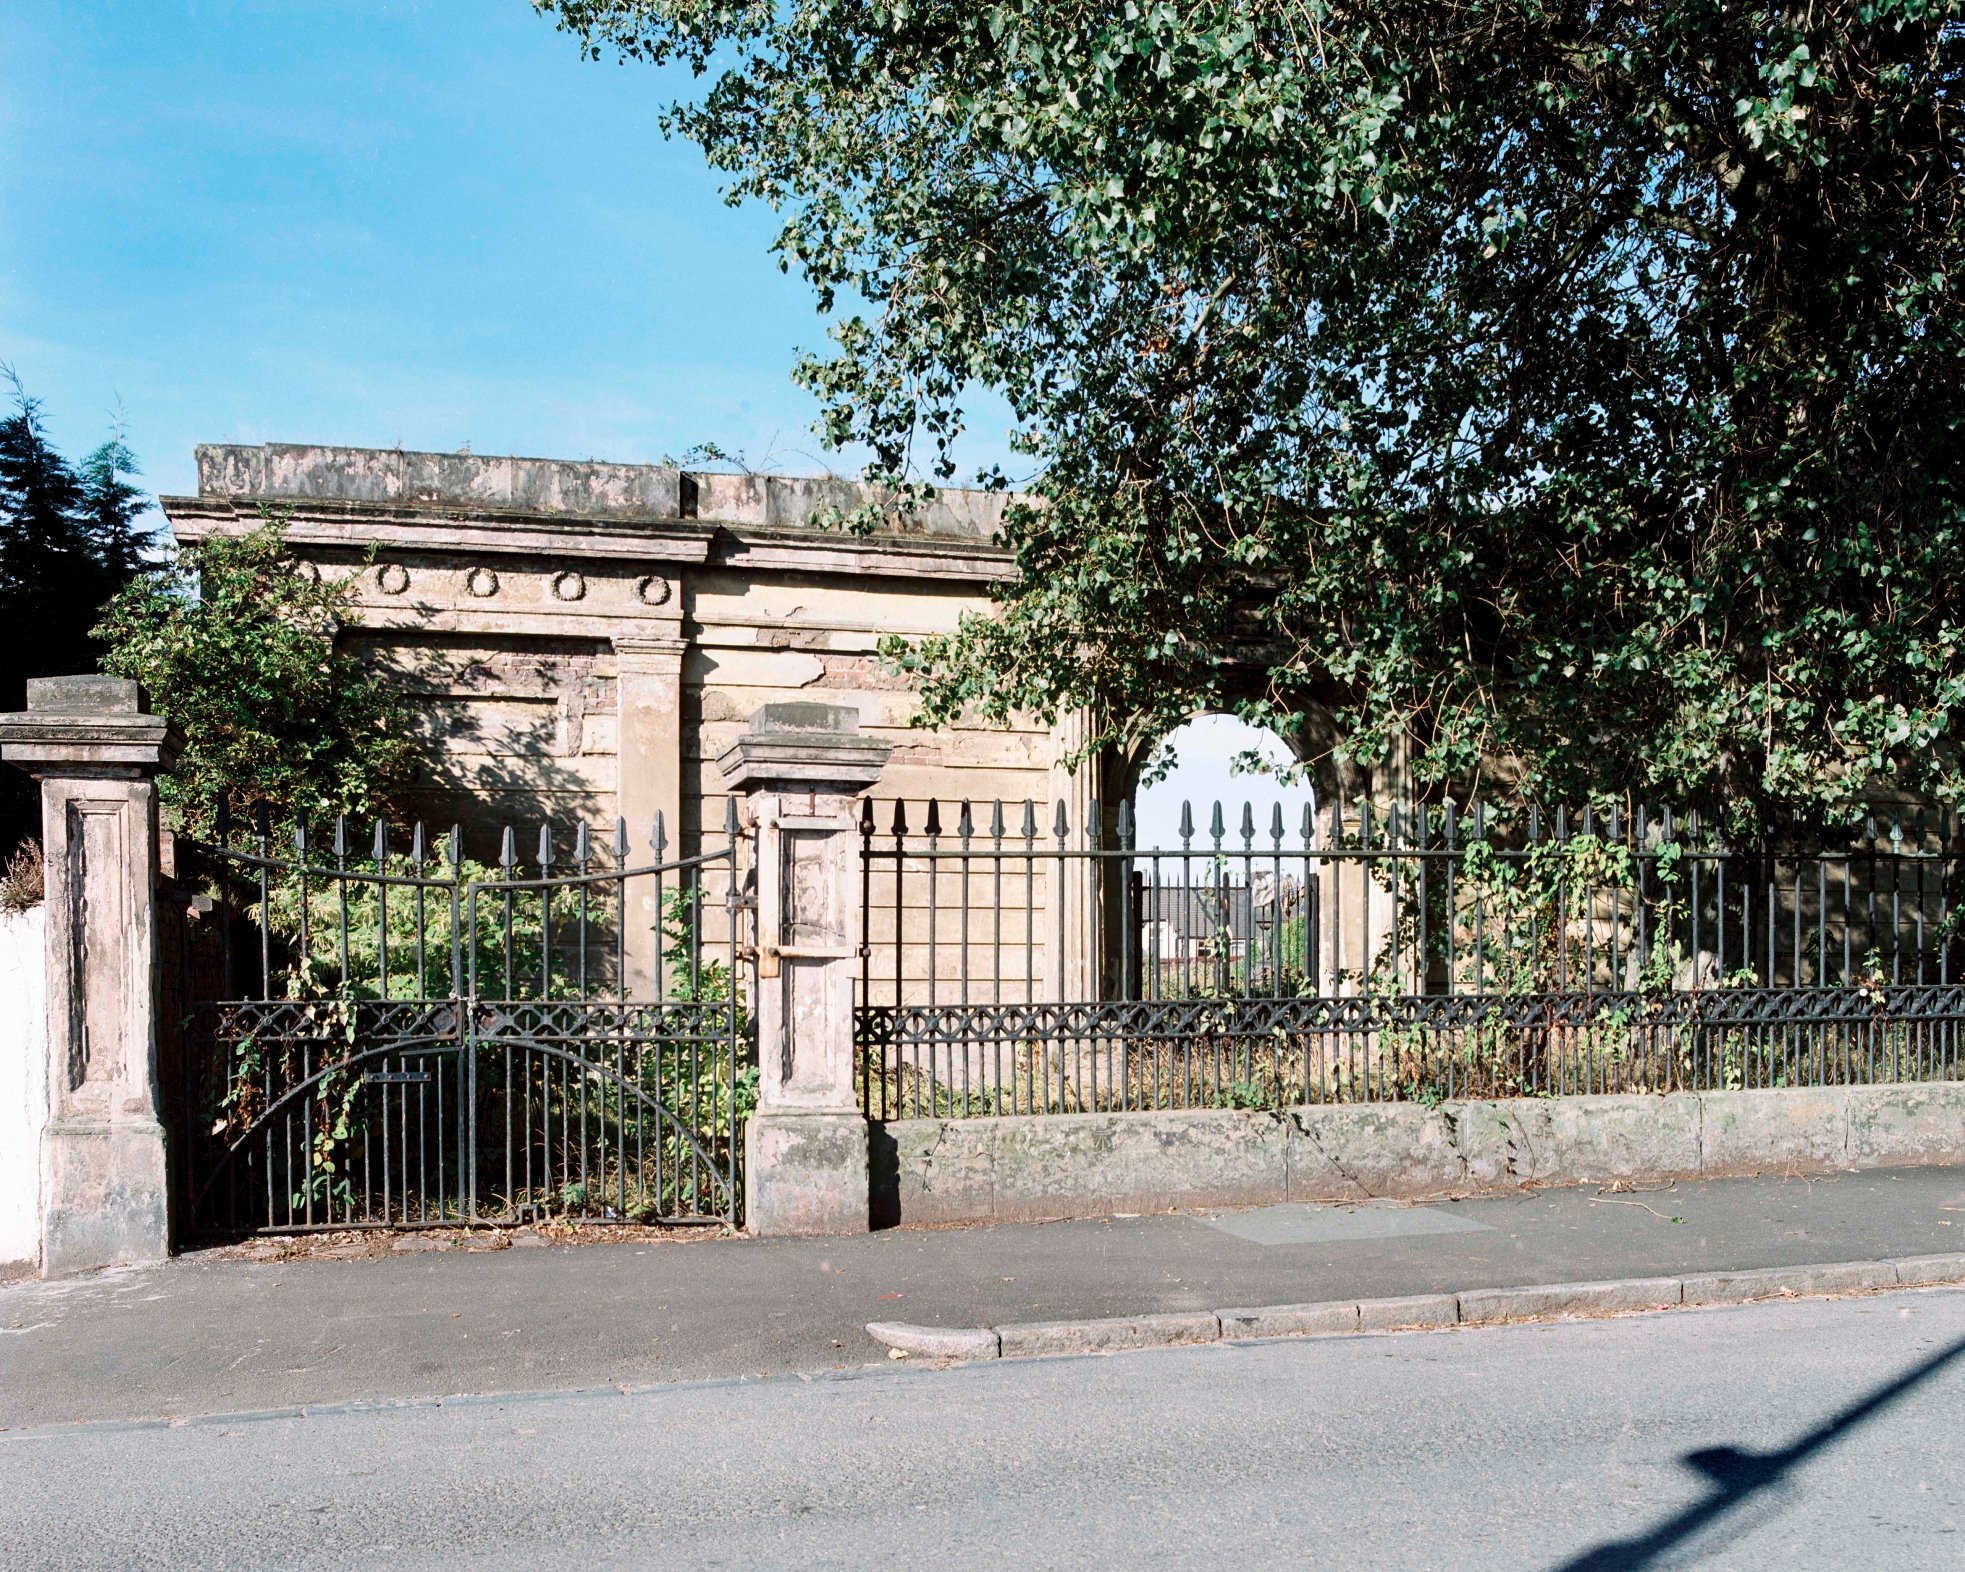 Exterior view of Jewish cemetery screen with front railings, Deane Road cemetery, Merseyside, Liverpool